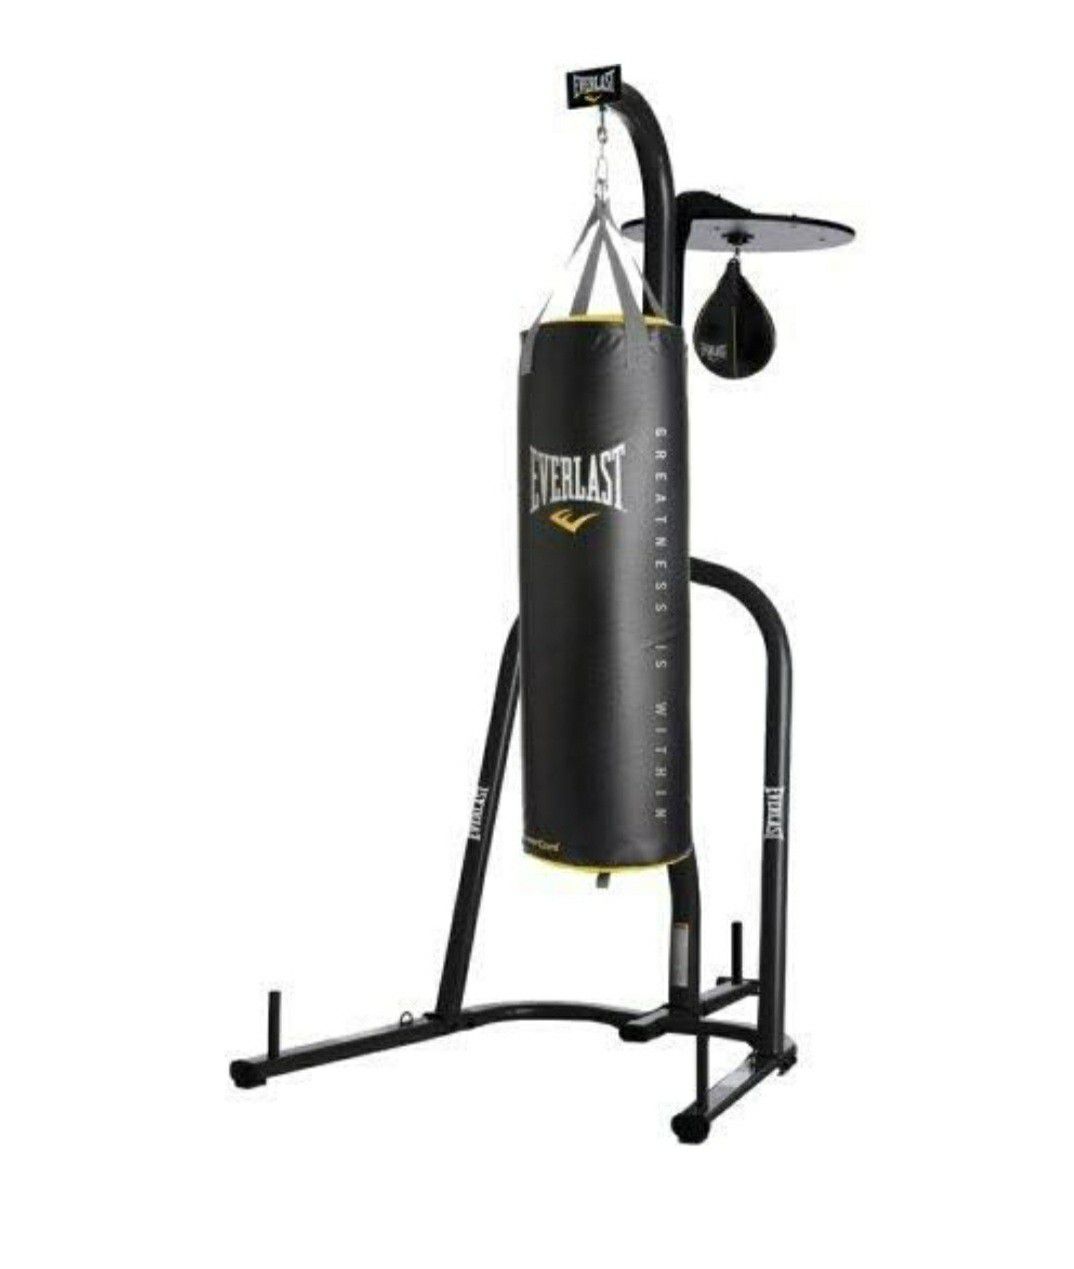 Everlast punching and speed bag